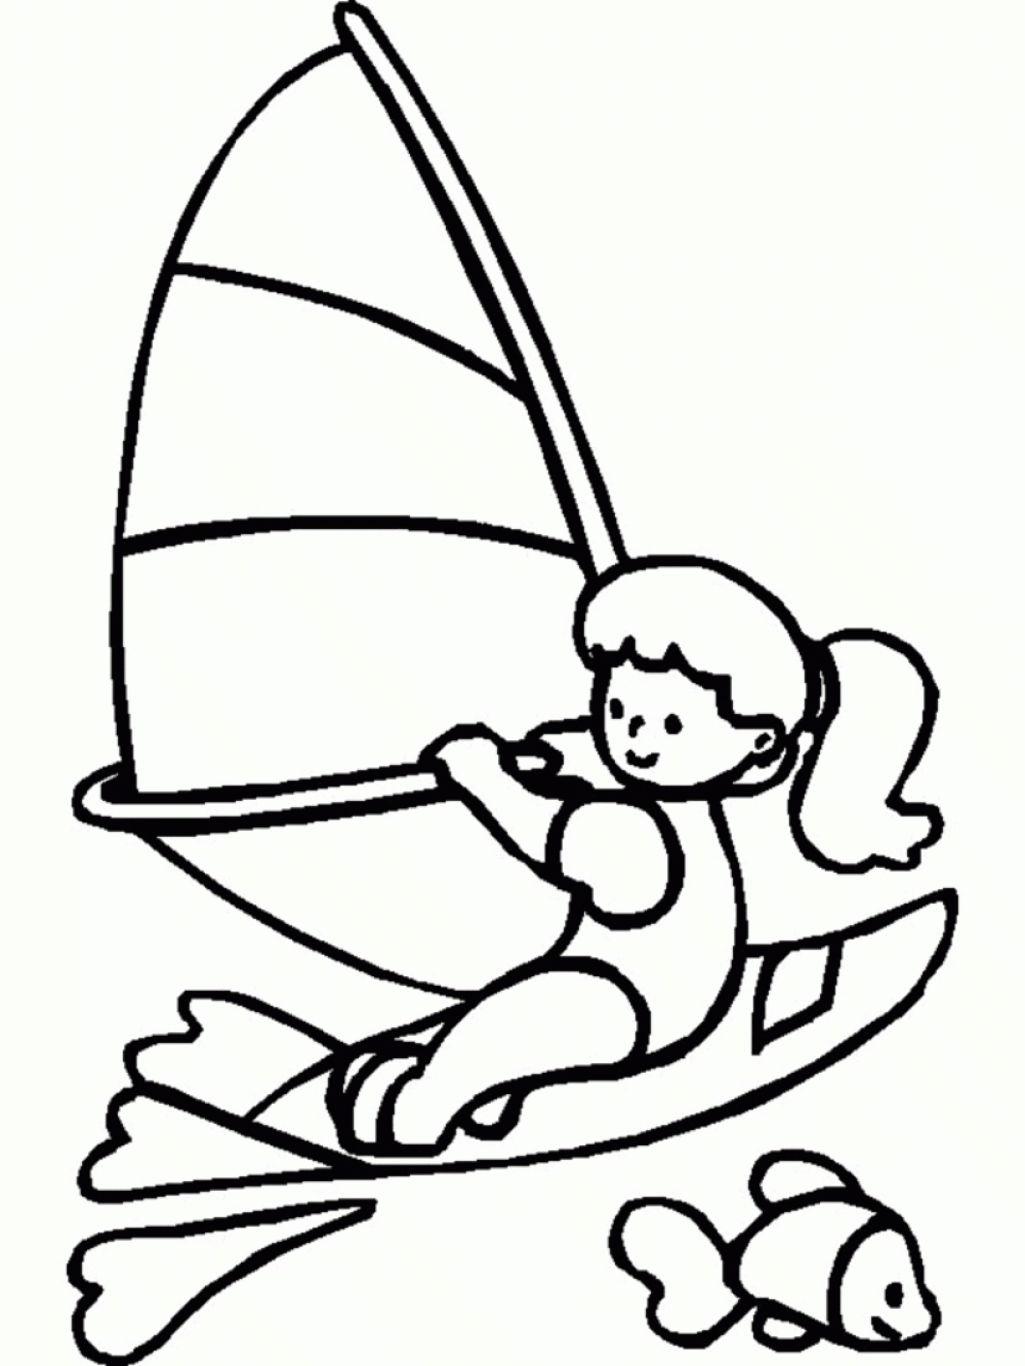 Coloring Pages Of Kids Playing Sports Free Coloring Pages Of ...